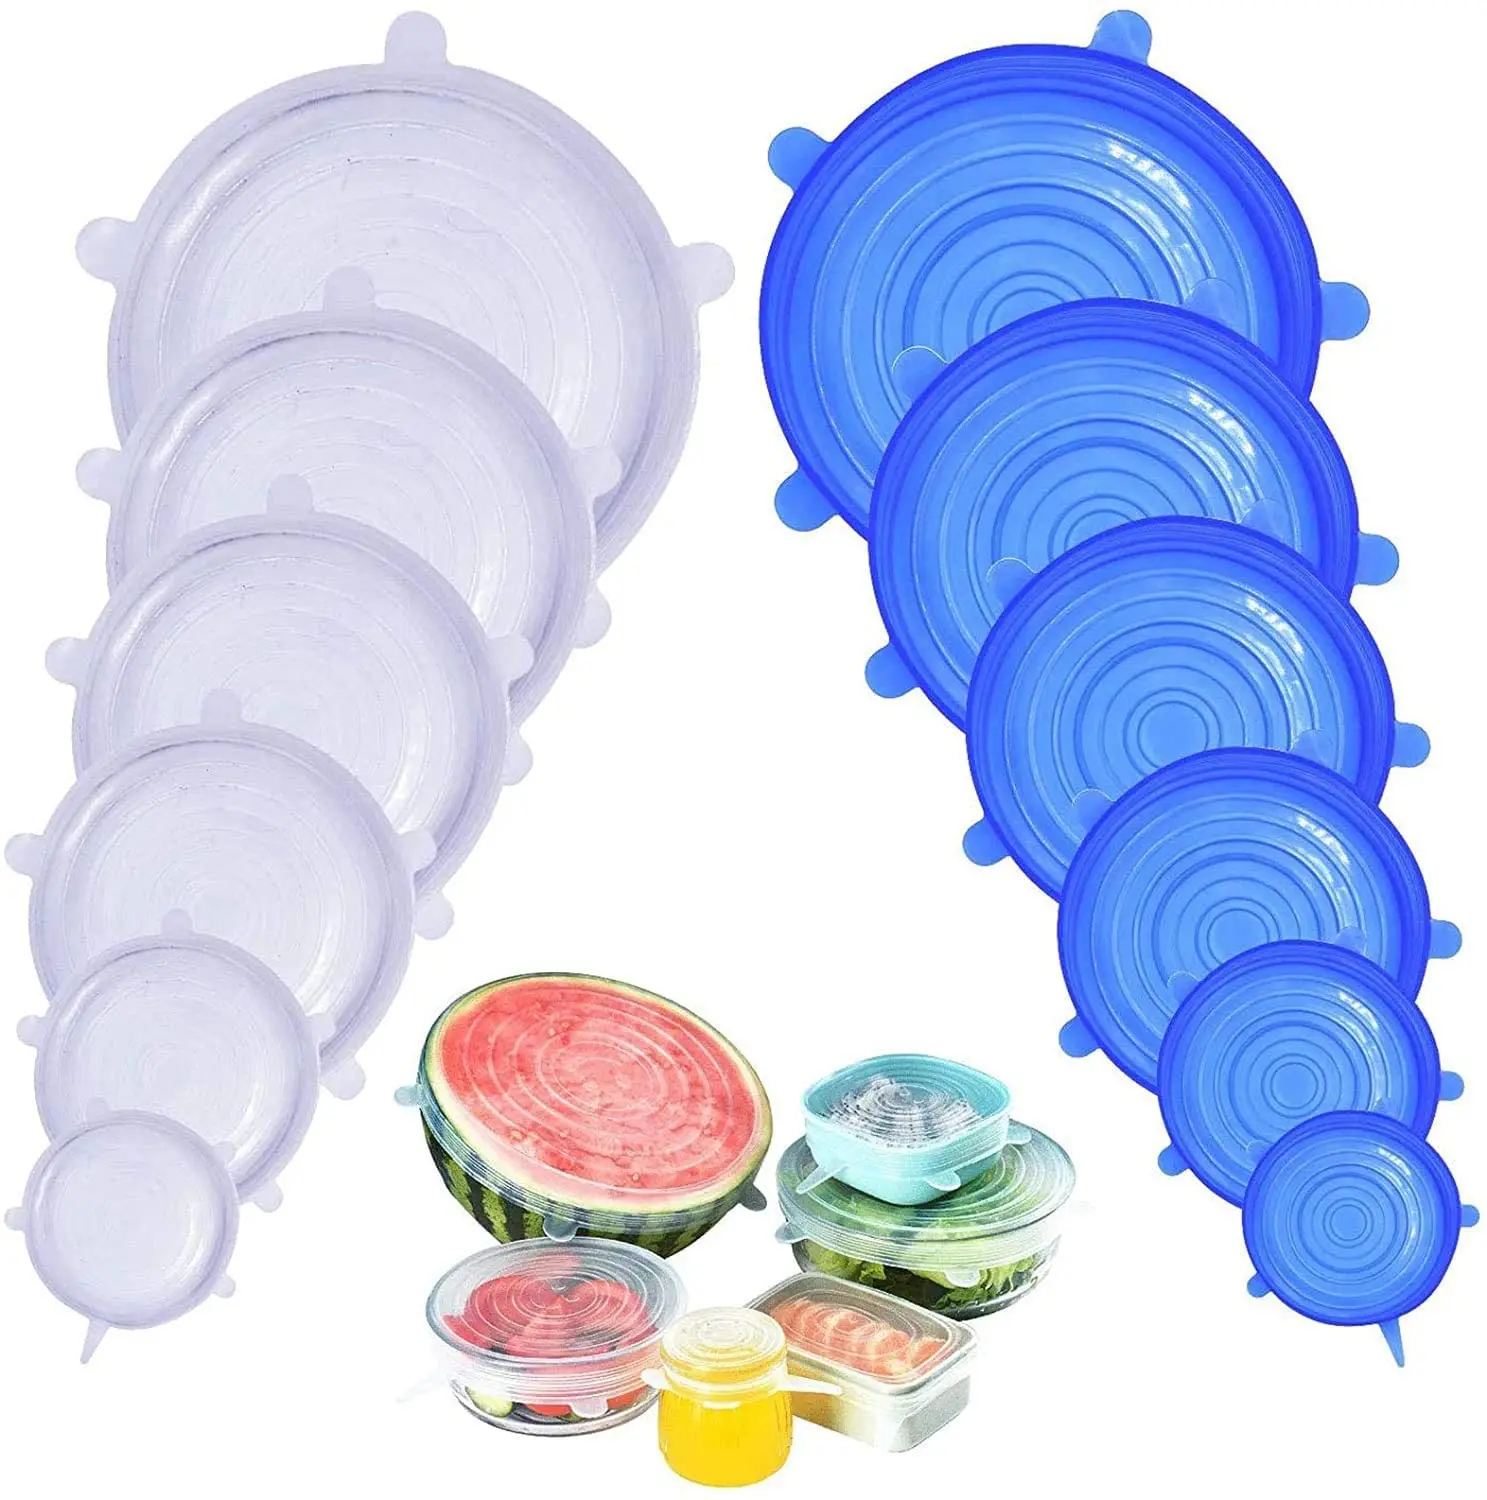 

LOVE'N Multi-functional silicone lid 6-piece preservation cover refrigerator microwave oven sealing cling film LV478F